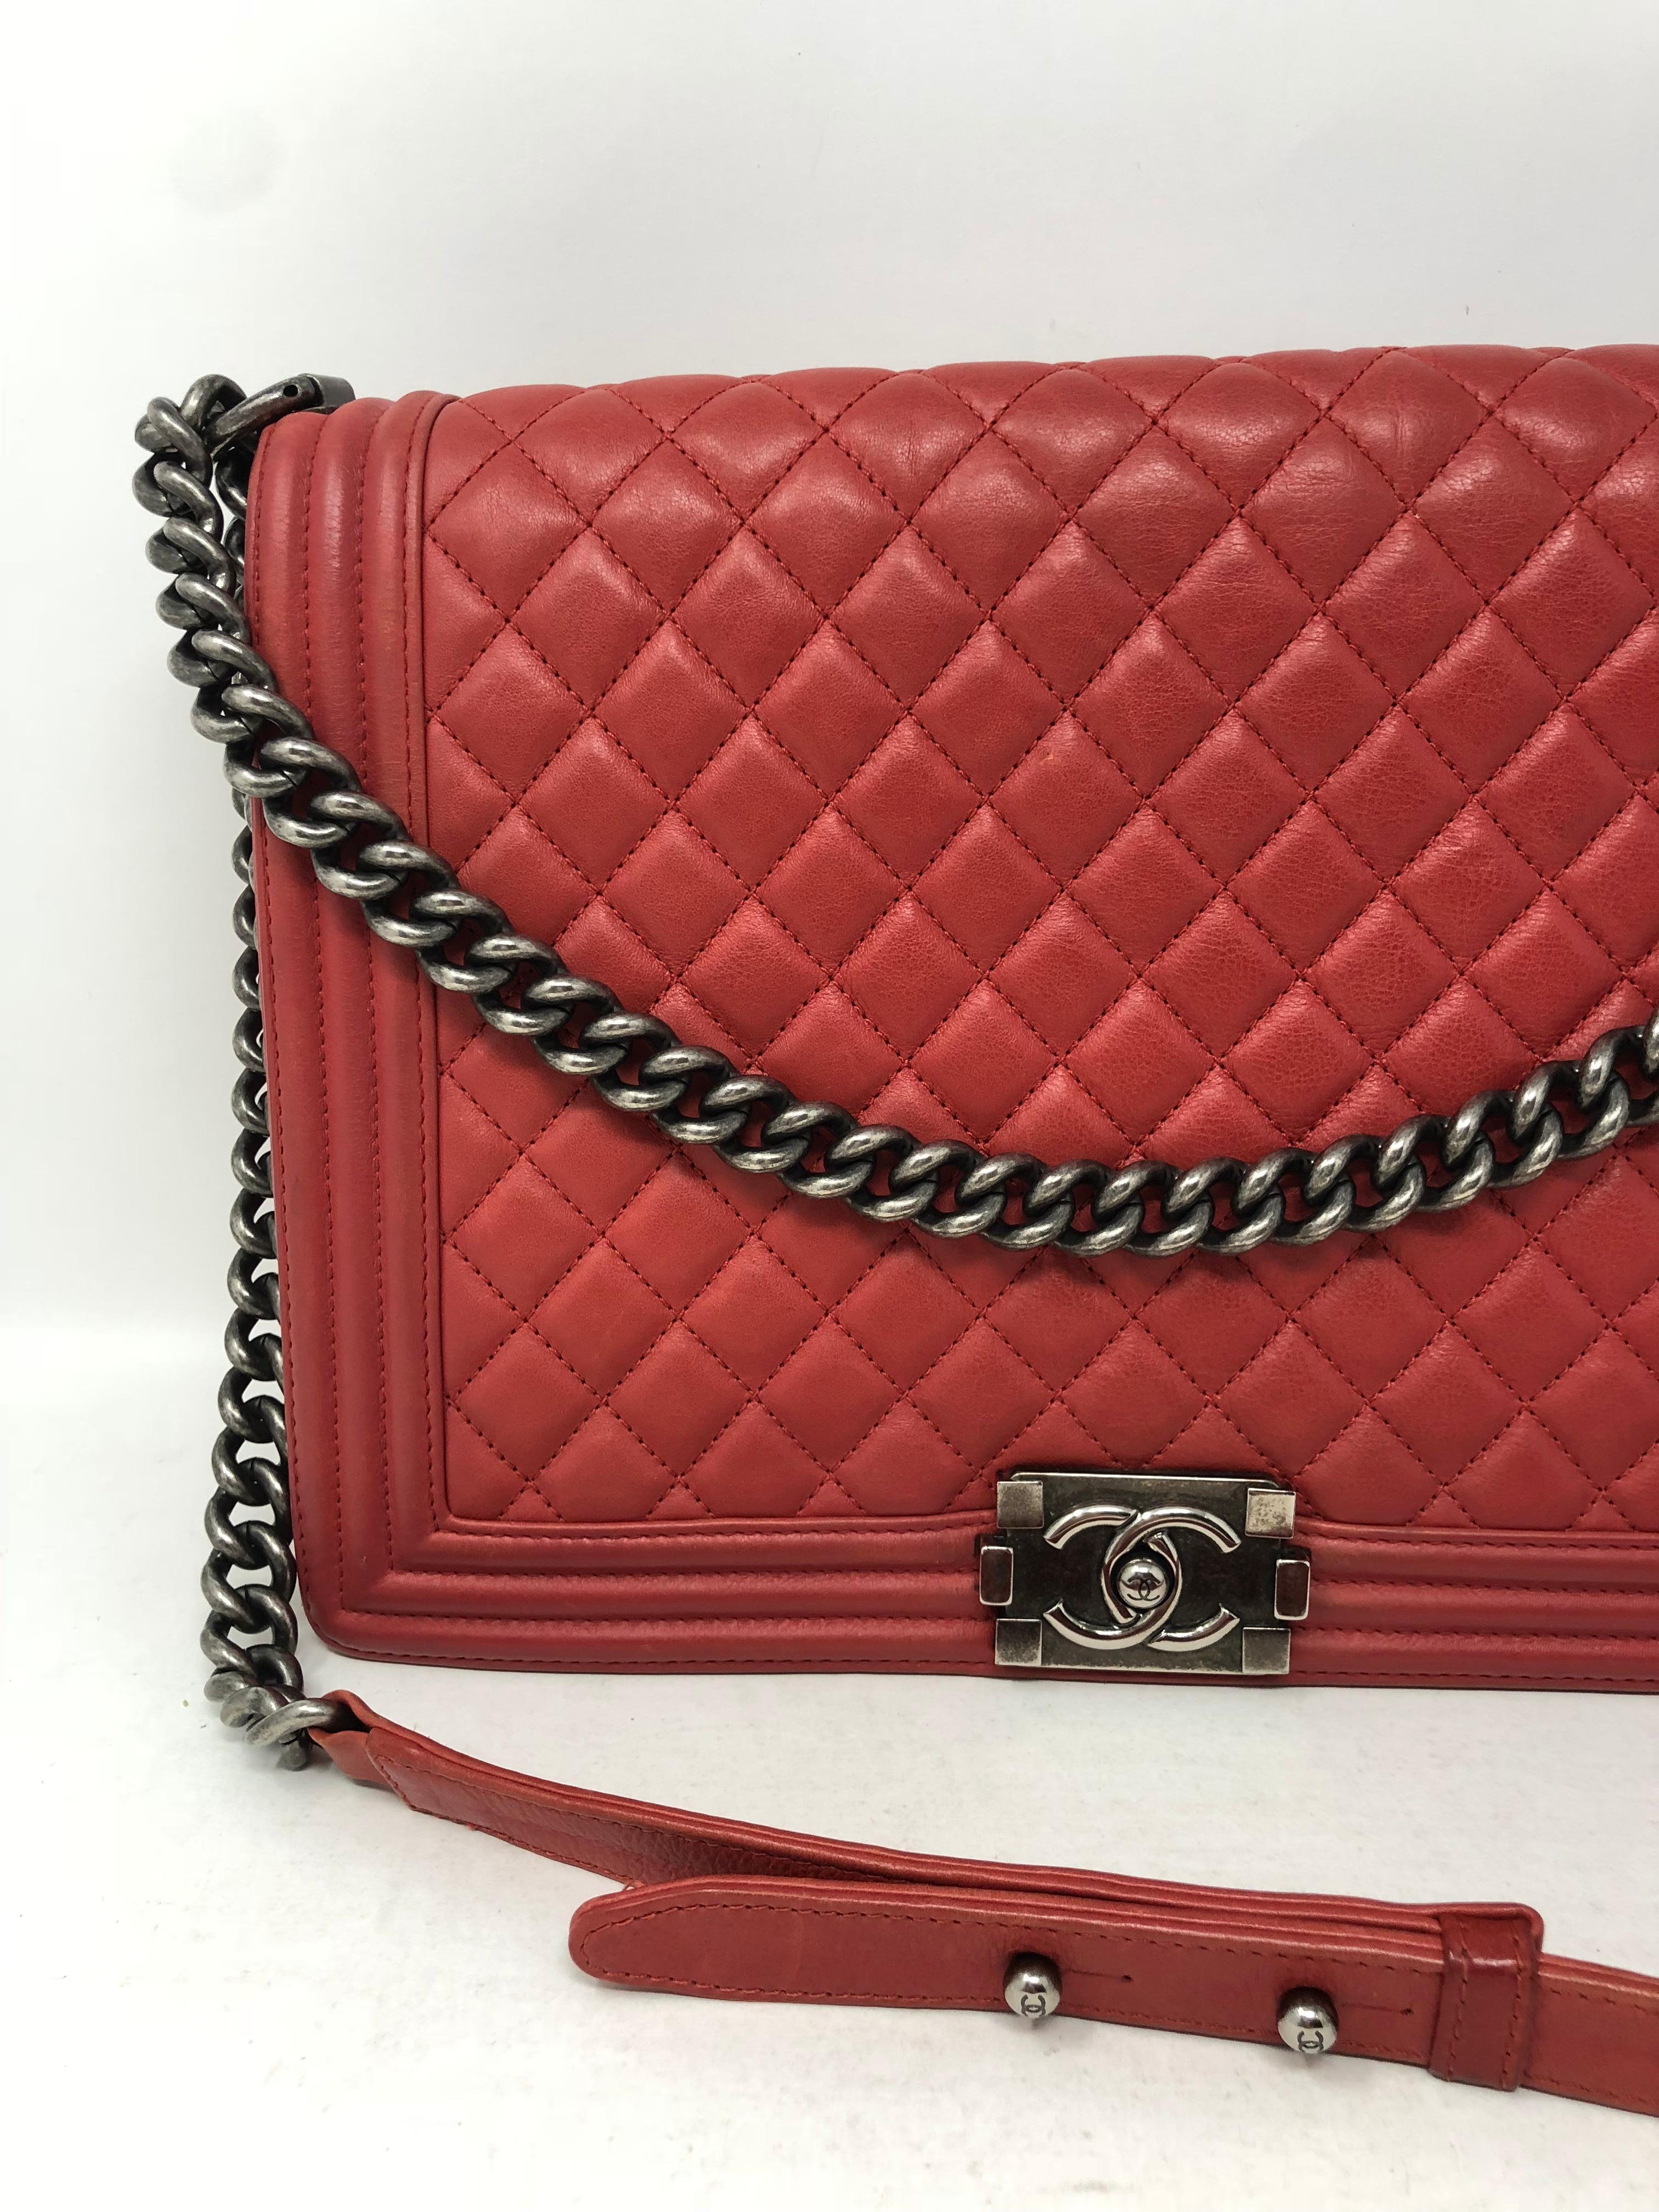 Chanel Red Boy Bag in calfskin leather and antique silver hardware. Large size Boy bag. Fair to good condition. Slight wear on corners. Guaranteed authentic. 